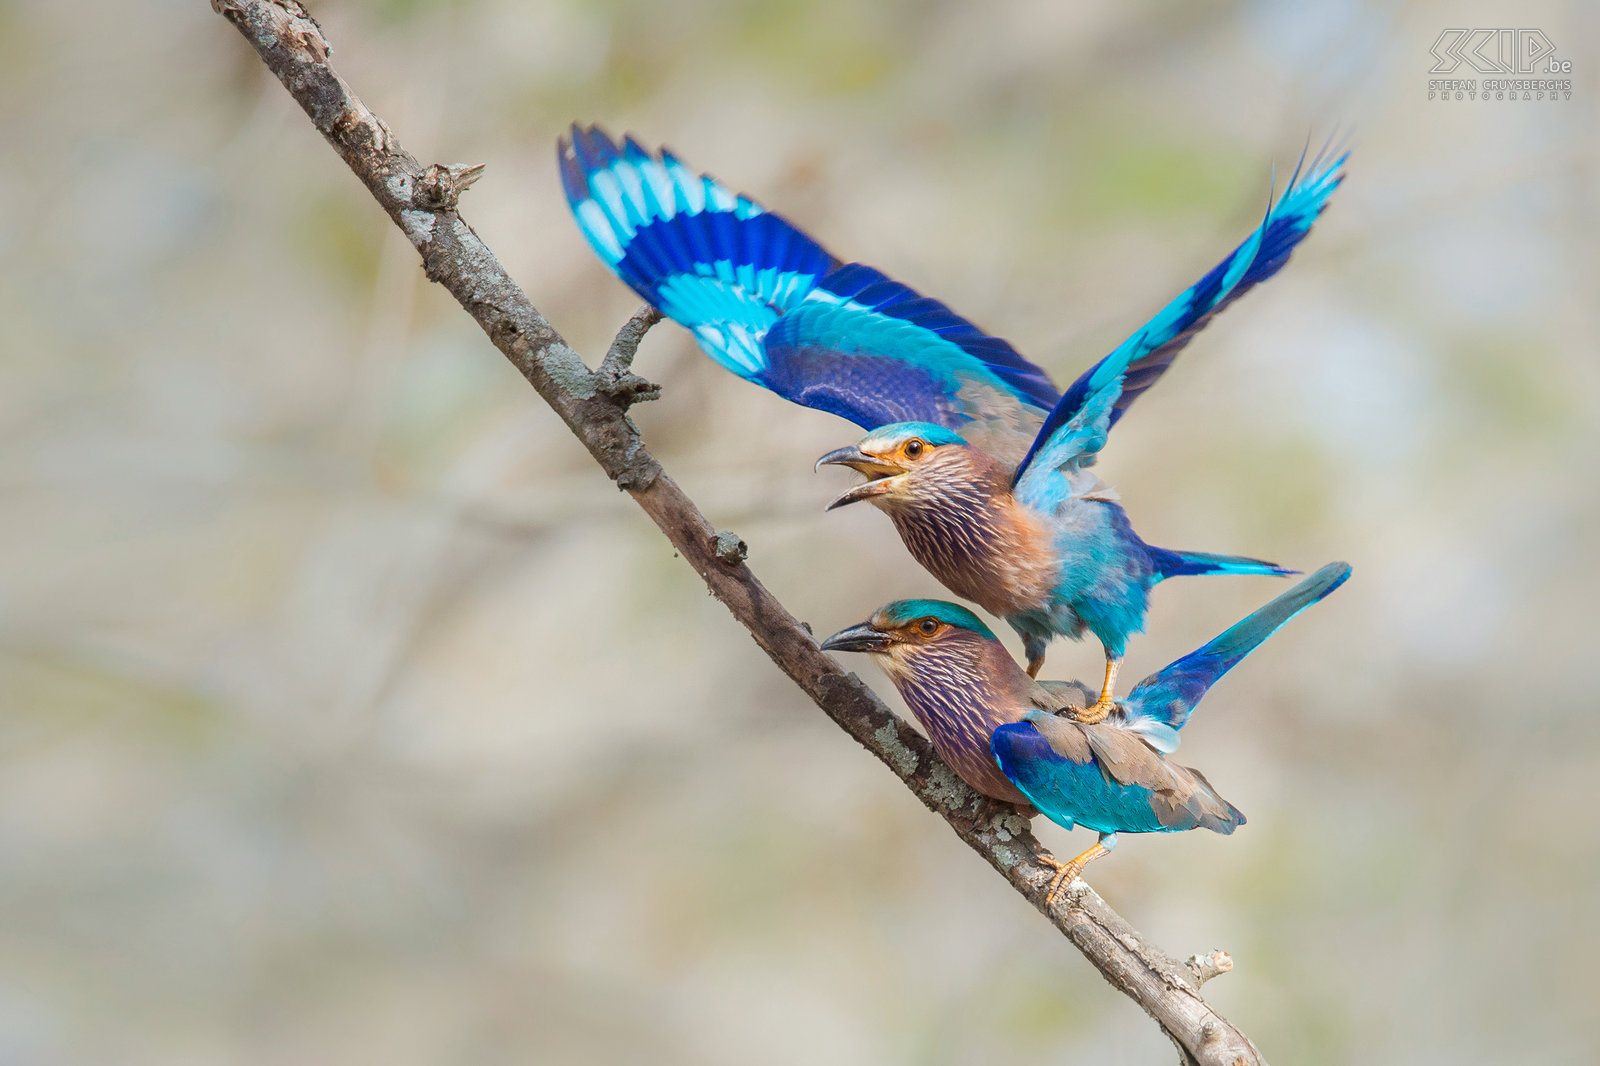 Kabini - Mating Indian Rollers  A common but very colourful bird is the Indian roller (Coracias benghalensis). We 'caught' them while they were mating. Stefan Cruysberghs